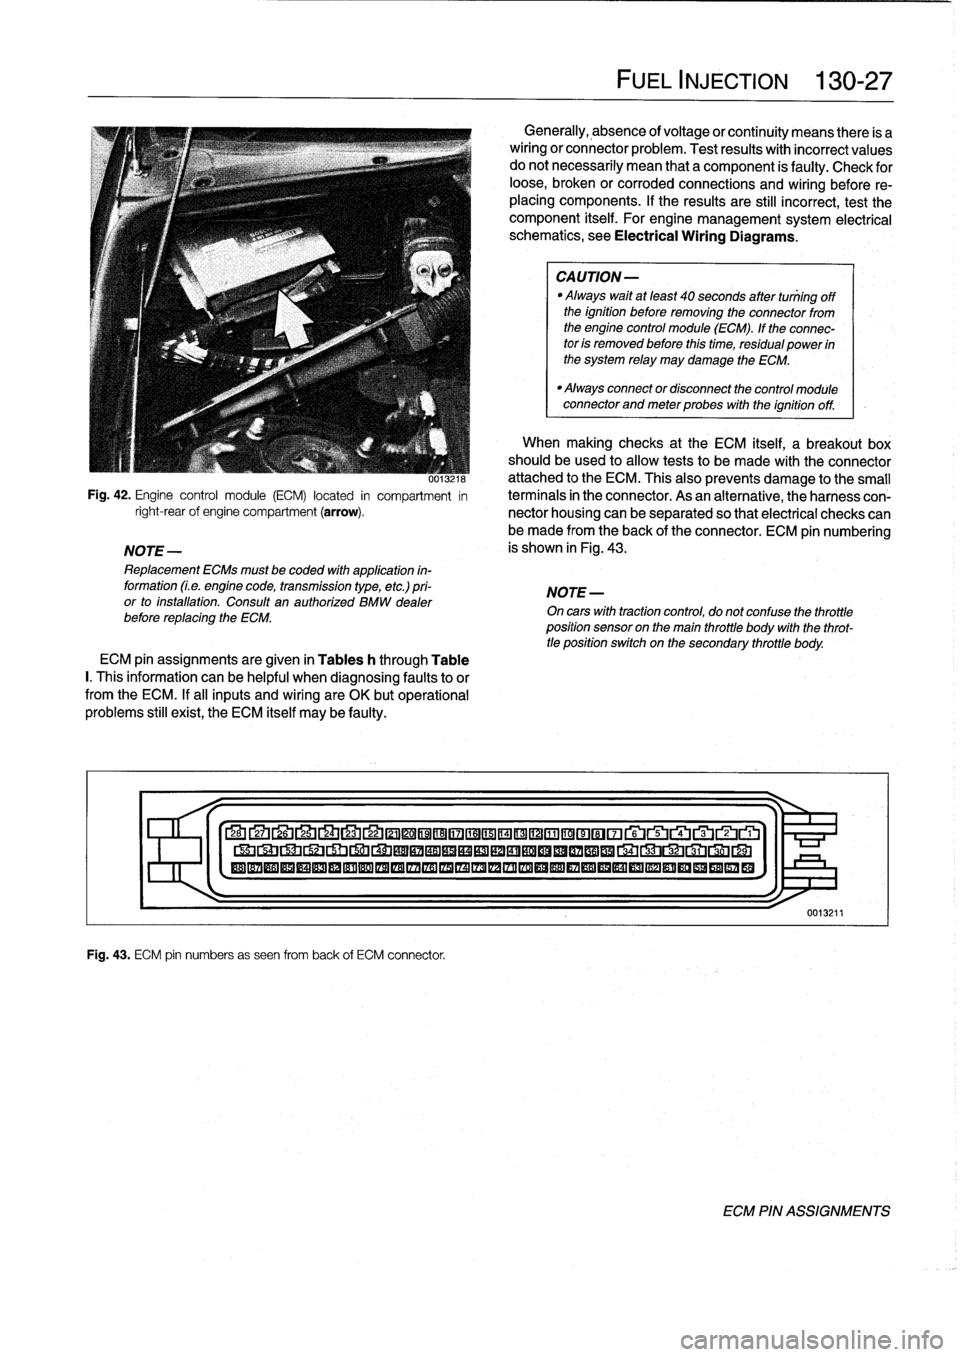 BMW 325i 1998 E36 Workshop Manual 
0013ZIM
Fig
.
42
.
Engine
control
module
(ECM)
located
in
compartment
in
right-rearof
engine
compartment
(arrow)
.

NOTE-

Replacement
ECMs
must
be
coded
with
application
in-
formation
(Le
.
engine
c